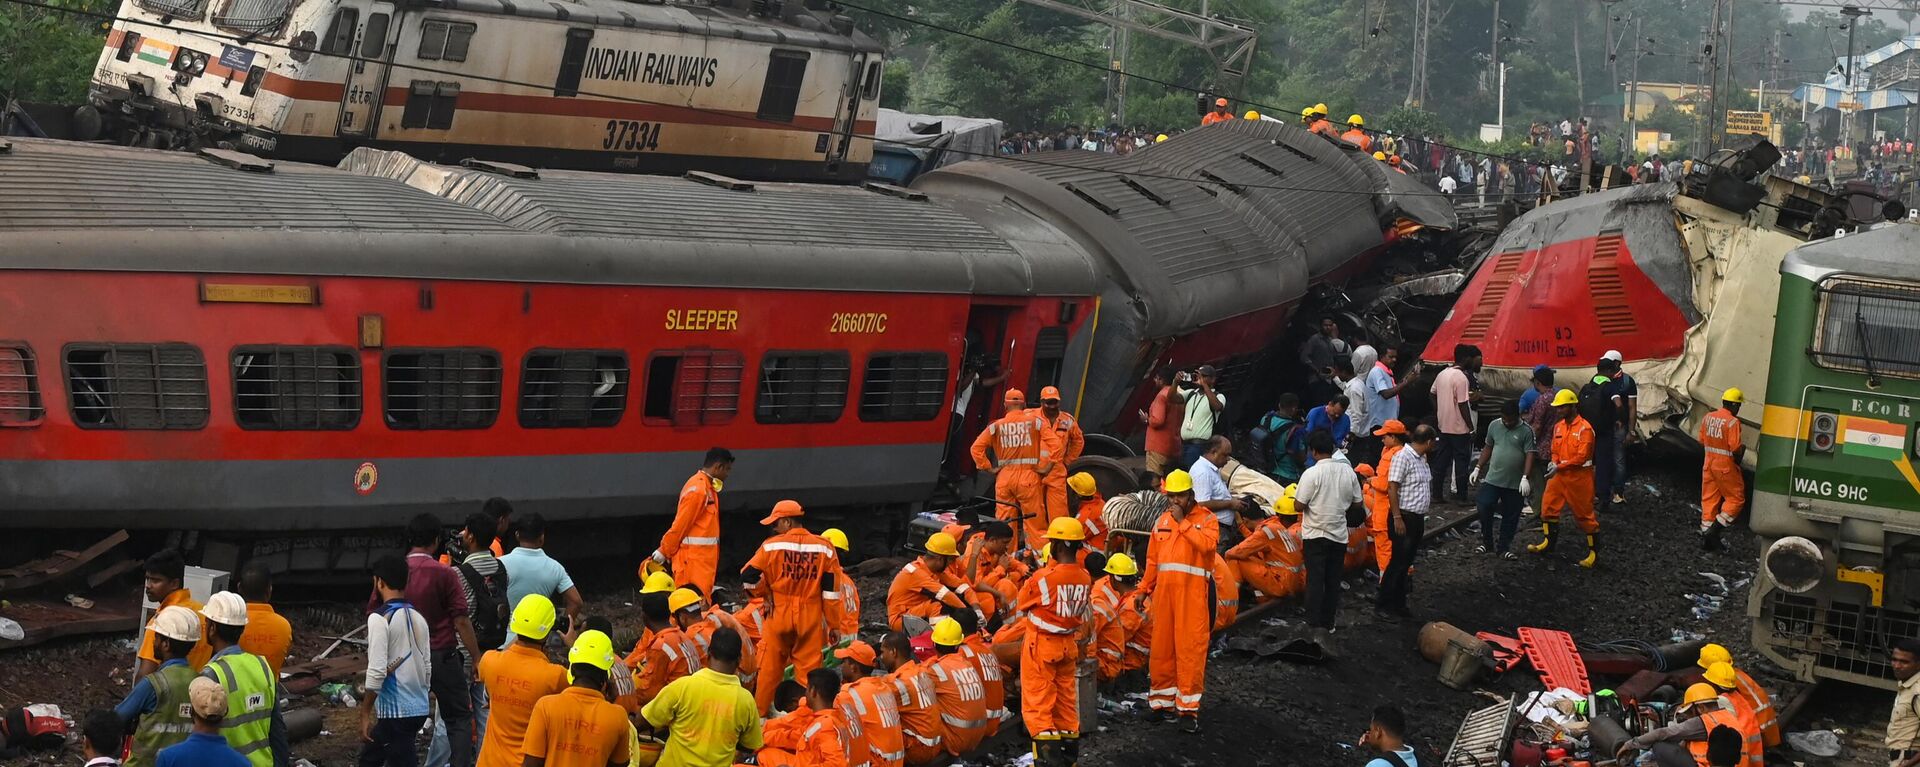 Rescue workers gather around damaged carriages at the accident site of a three-train collision near Balasore, about 200 km (125 miles) from the state capital Bhubaneswar in the eastern state of Odisha, on June 3, 2023. At least 288 people were killed and more than 850 injured in a horrific three-train collision in India, officials said on June 3, the country's deadliest rail accident in more than 20 years. (Photo by Dibyangshu SARKAR / AFP) - Sputnik International, 1920, 03.06.2023